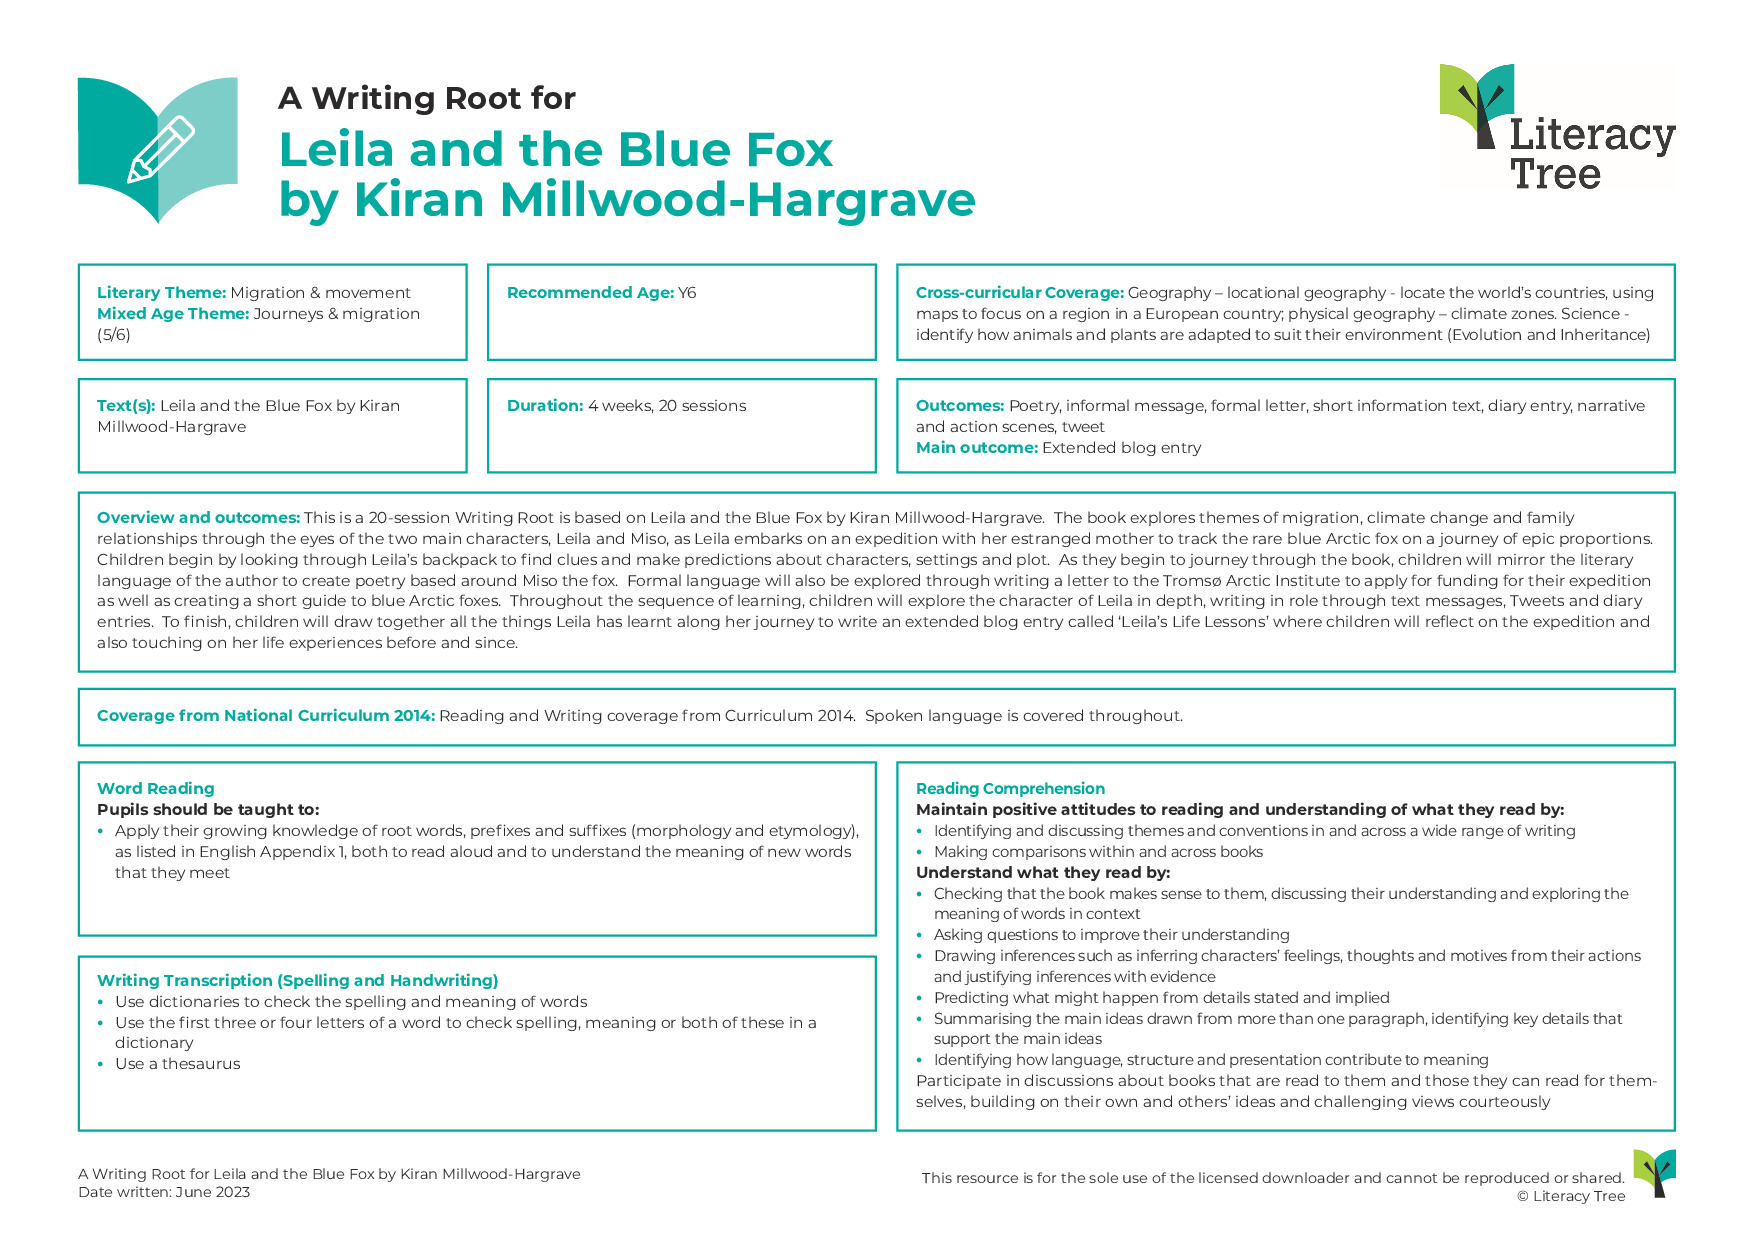 A Writing Root for Leila and the Blue Fox